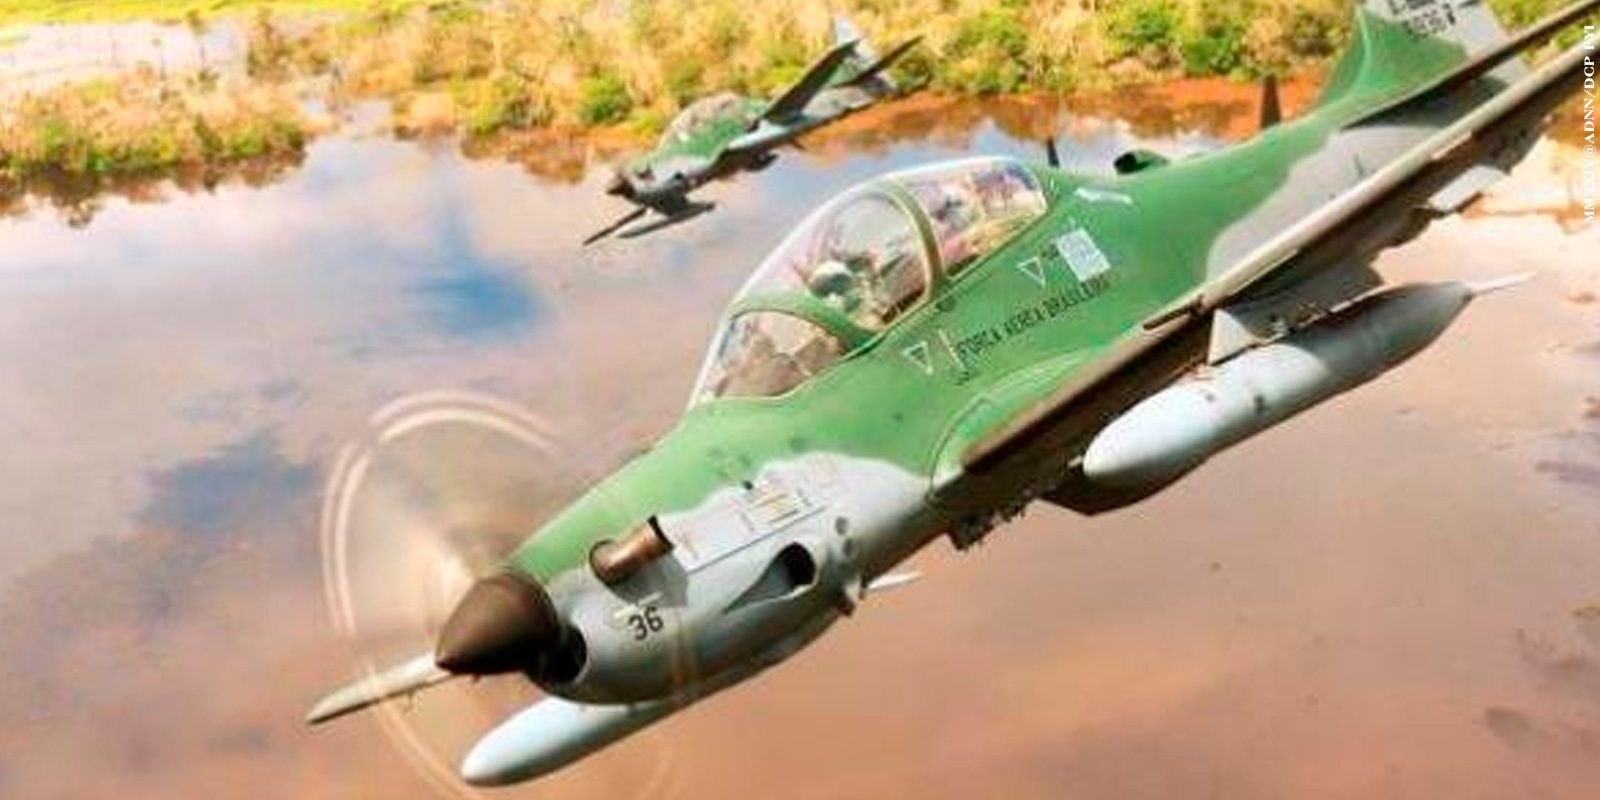 FAB fighters intercept aircraft carrying drugs